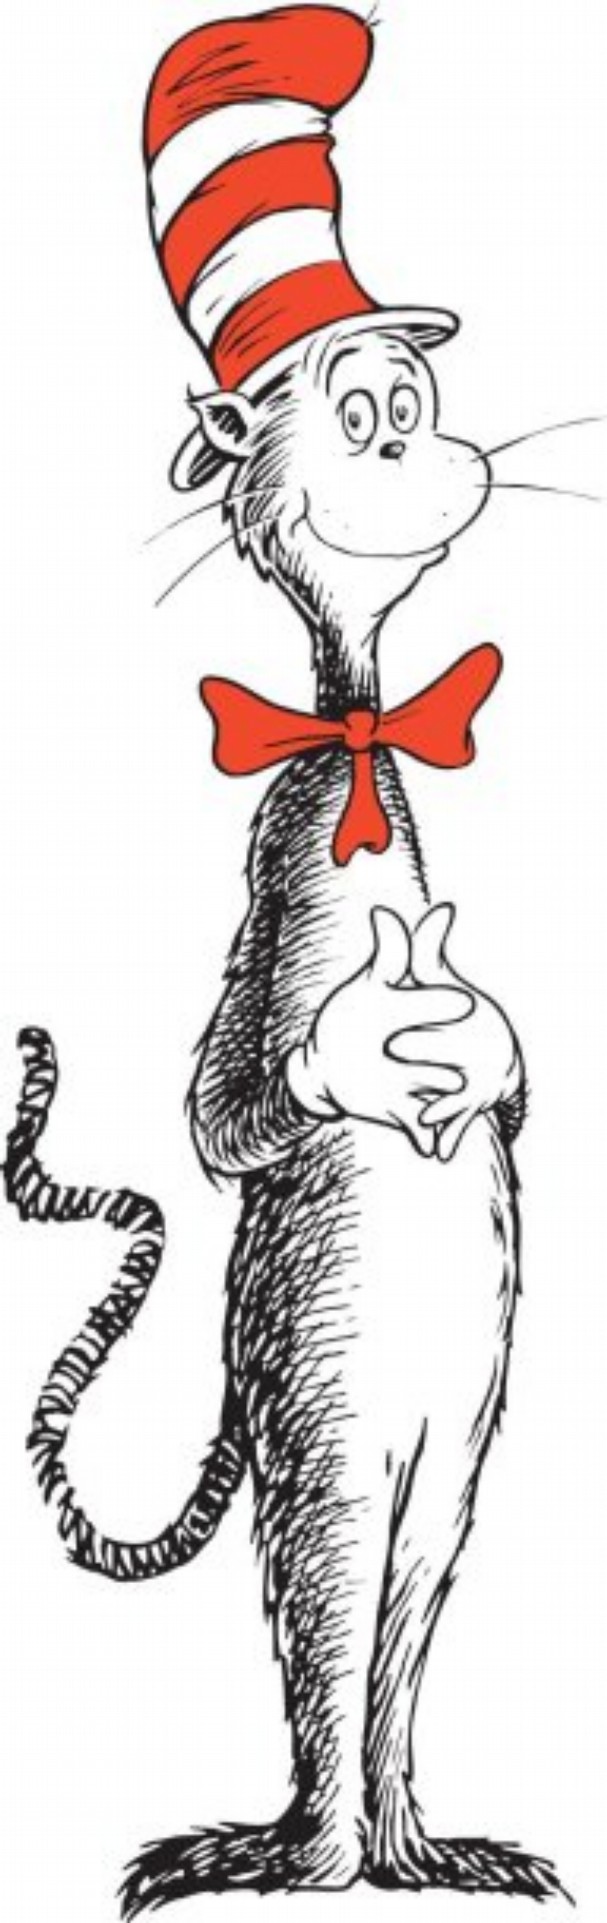 Cat in the hat dr seuss hat clip art hostted